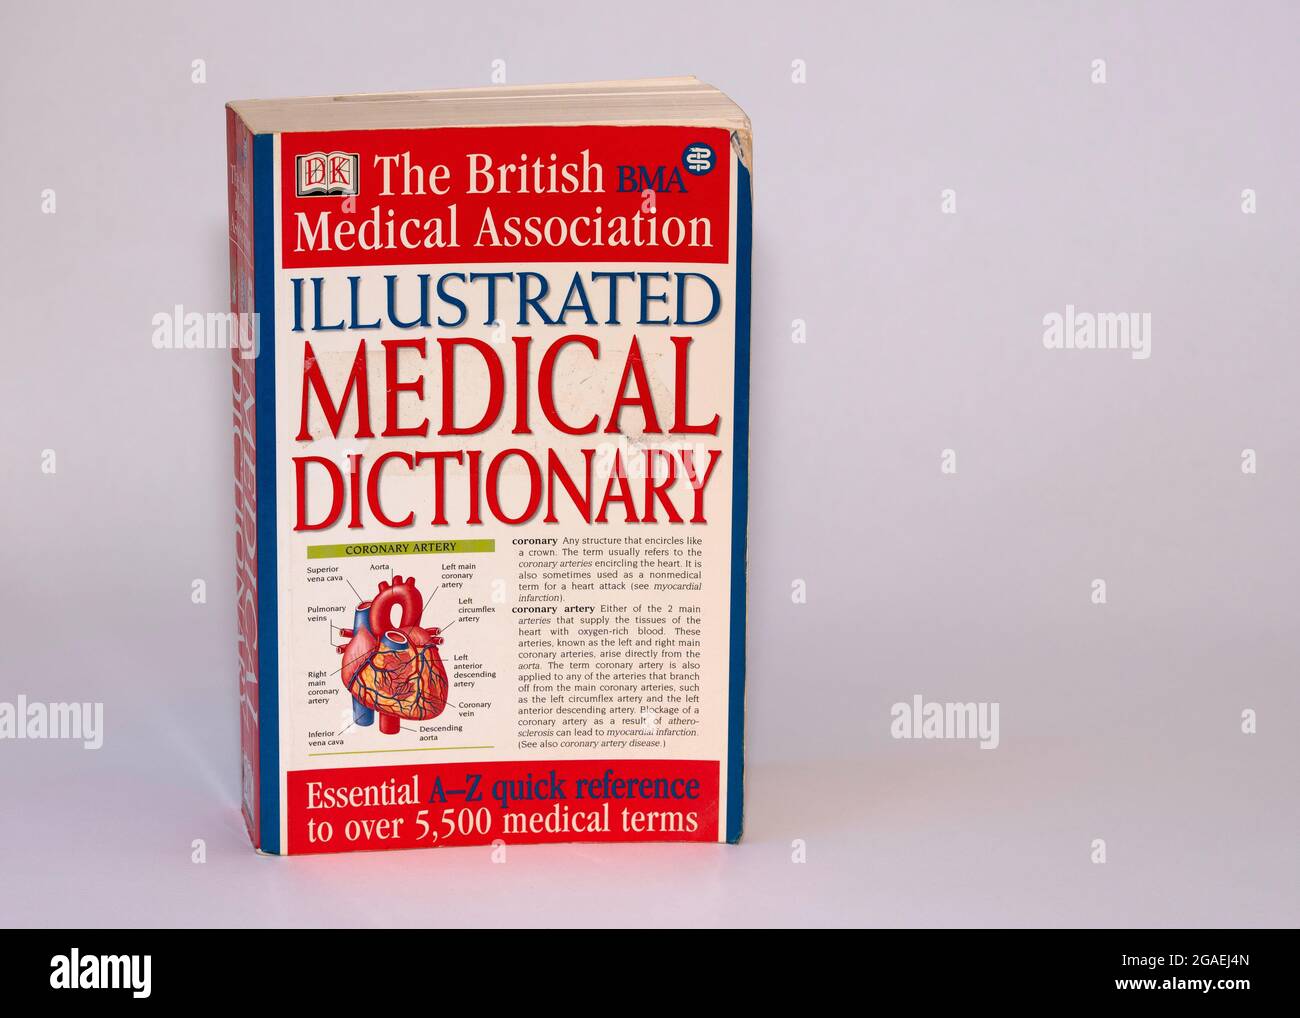 The British Medical Association Illustrated Medical Dictionary paperback book Stock Photo